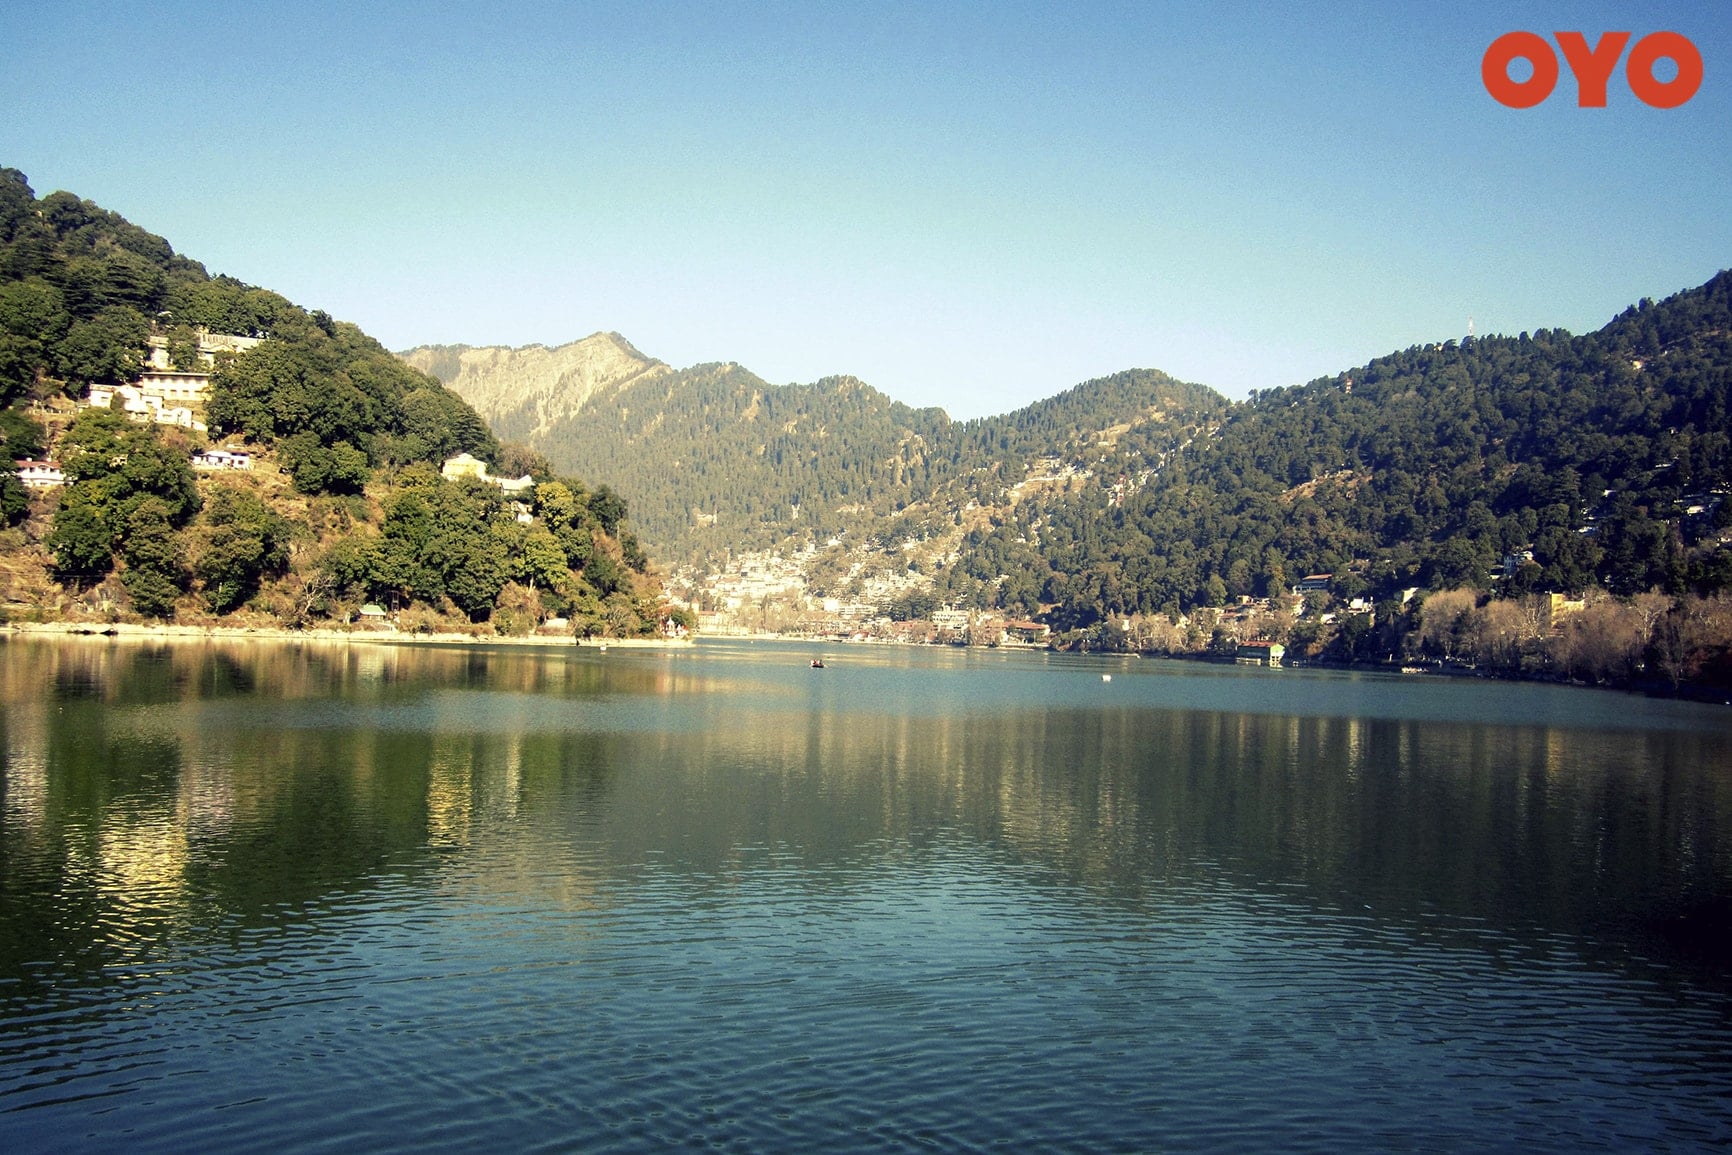 Bhimtal Lake, Uttrakhand - one of the famous lakes in India